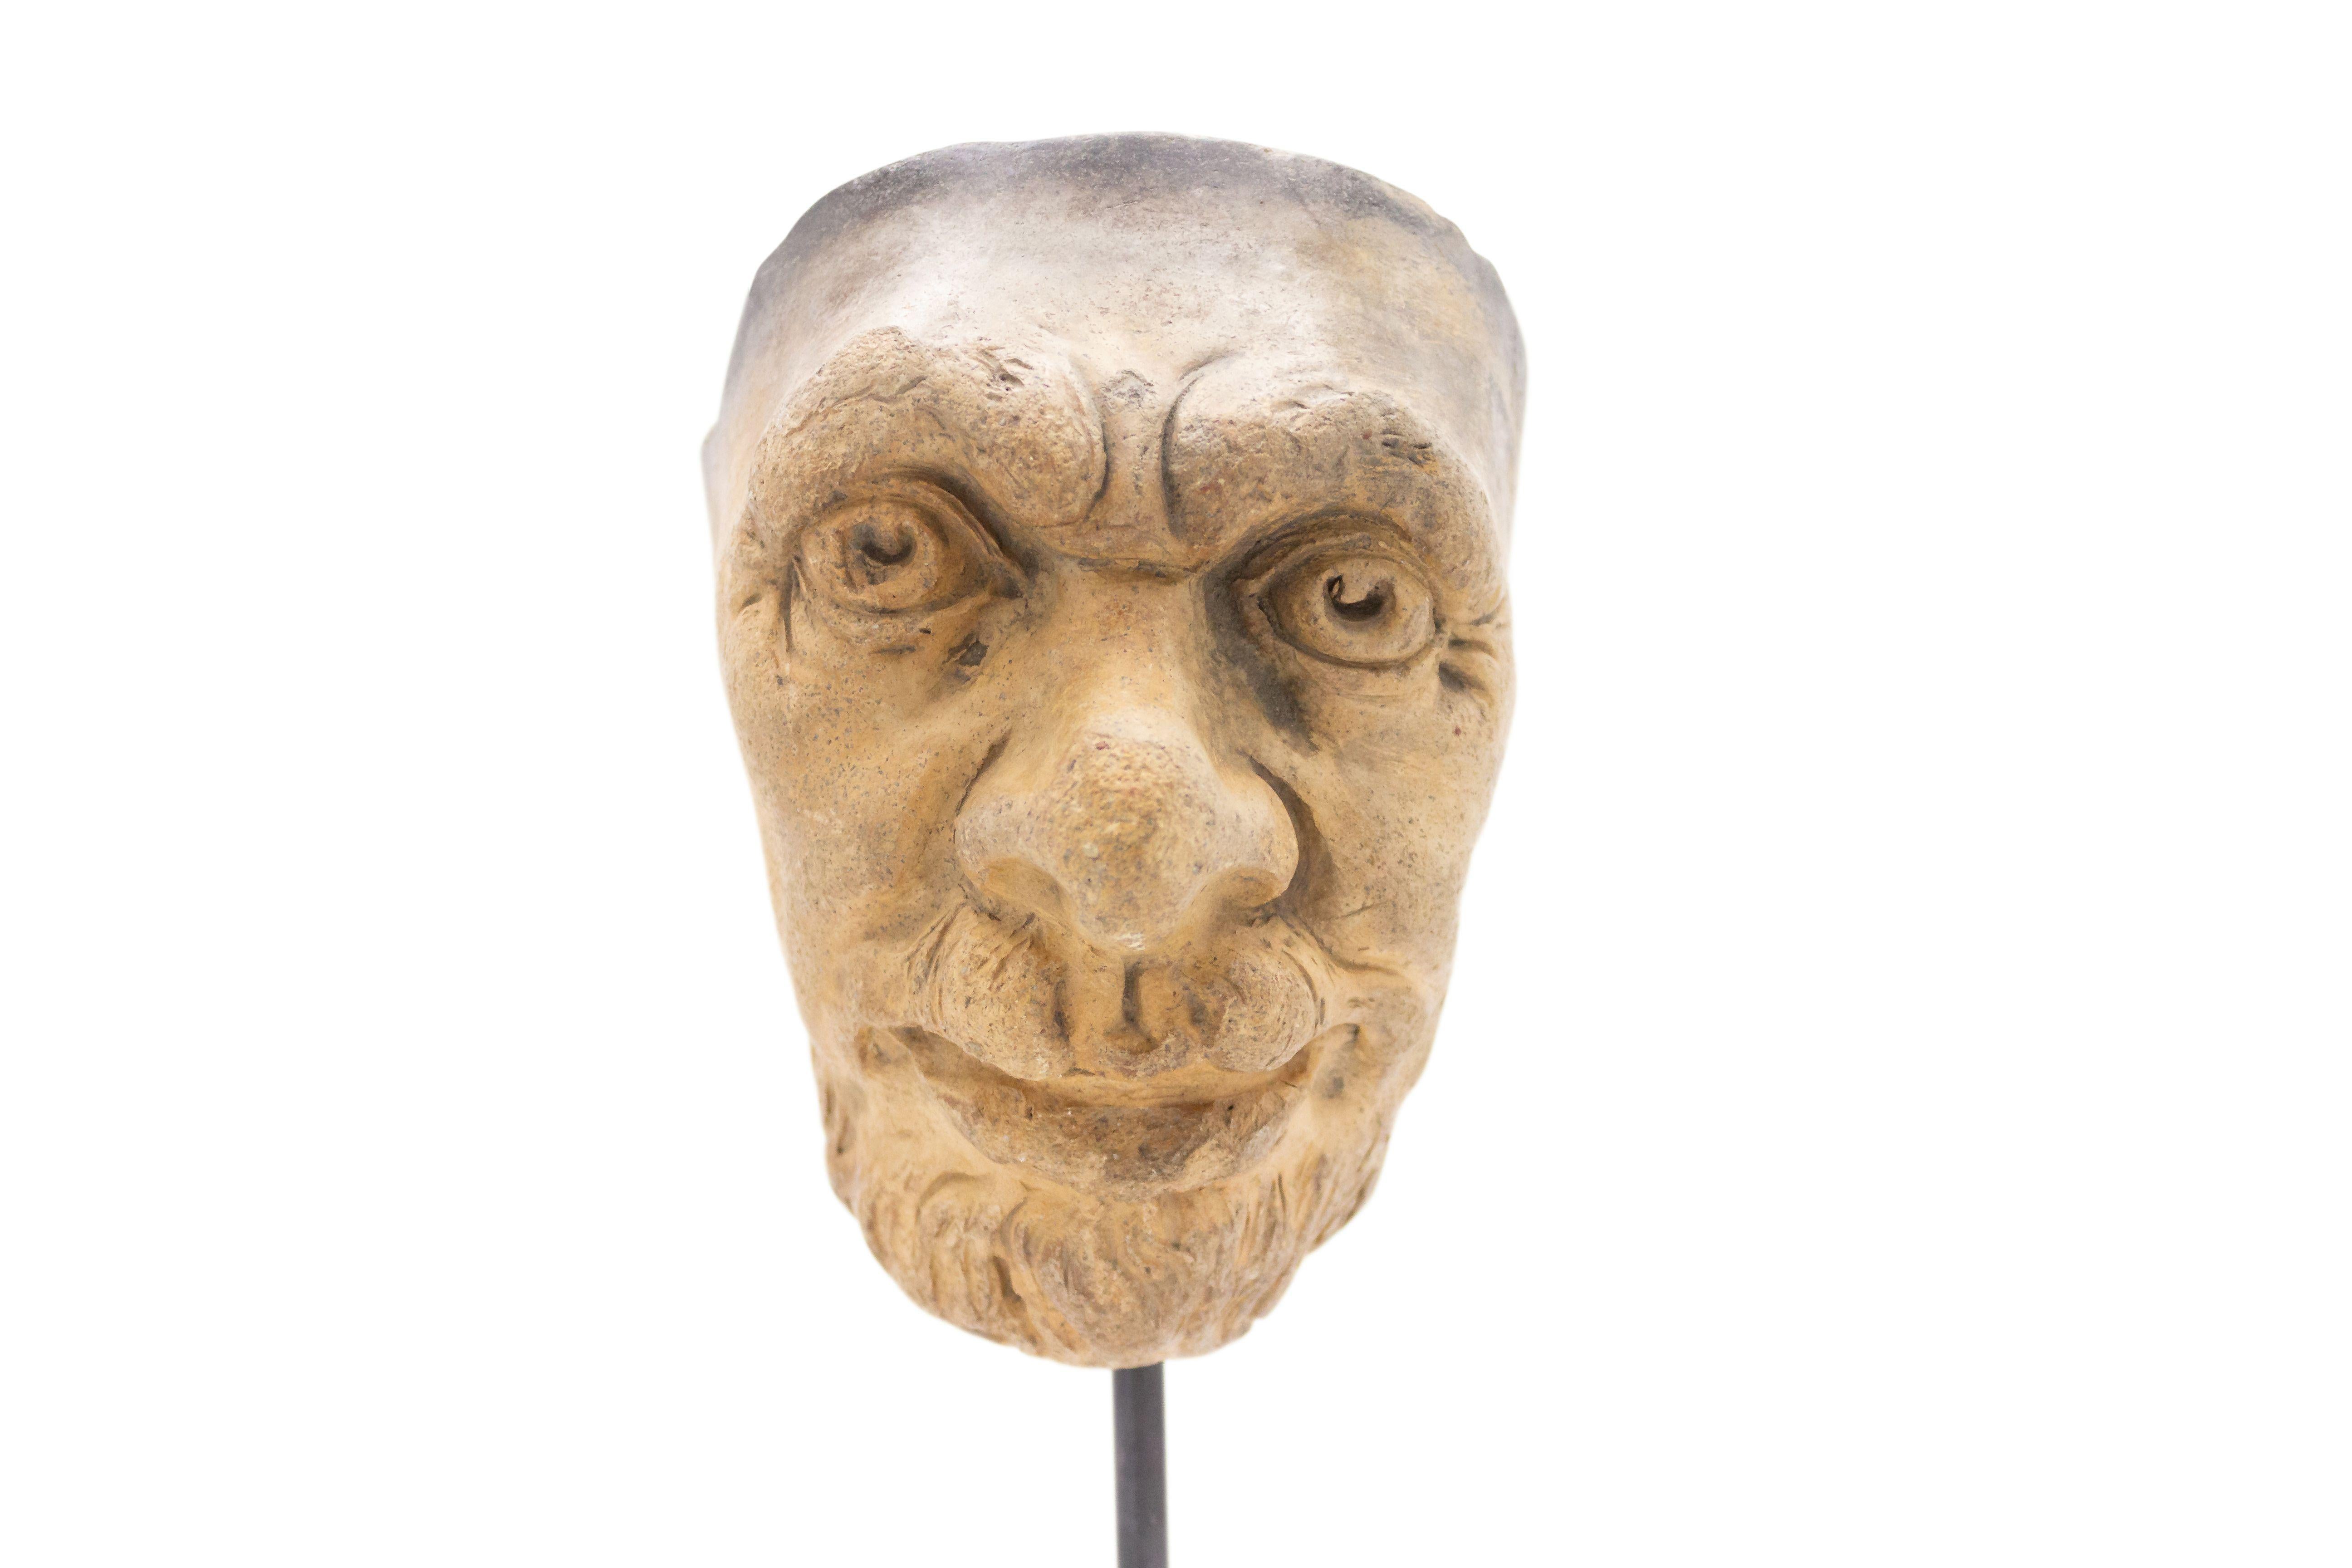 Continental German (late 19th Cent) sculpted terra-cotta master mask mold of a bearded old man with furrowed brow displayed on a square black marble base stand (part of a collection).
 